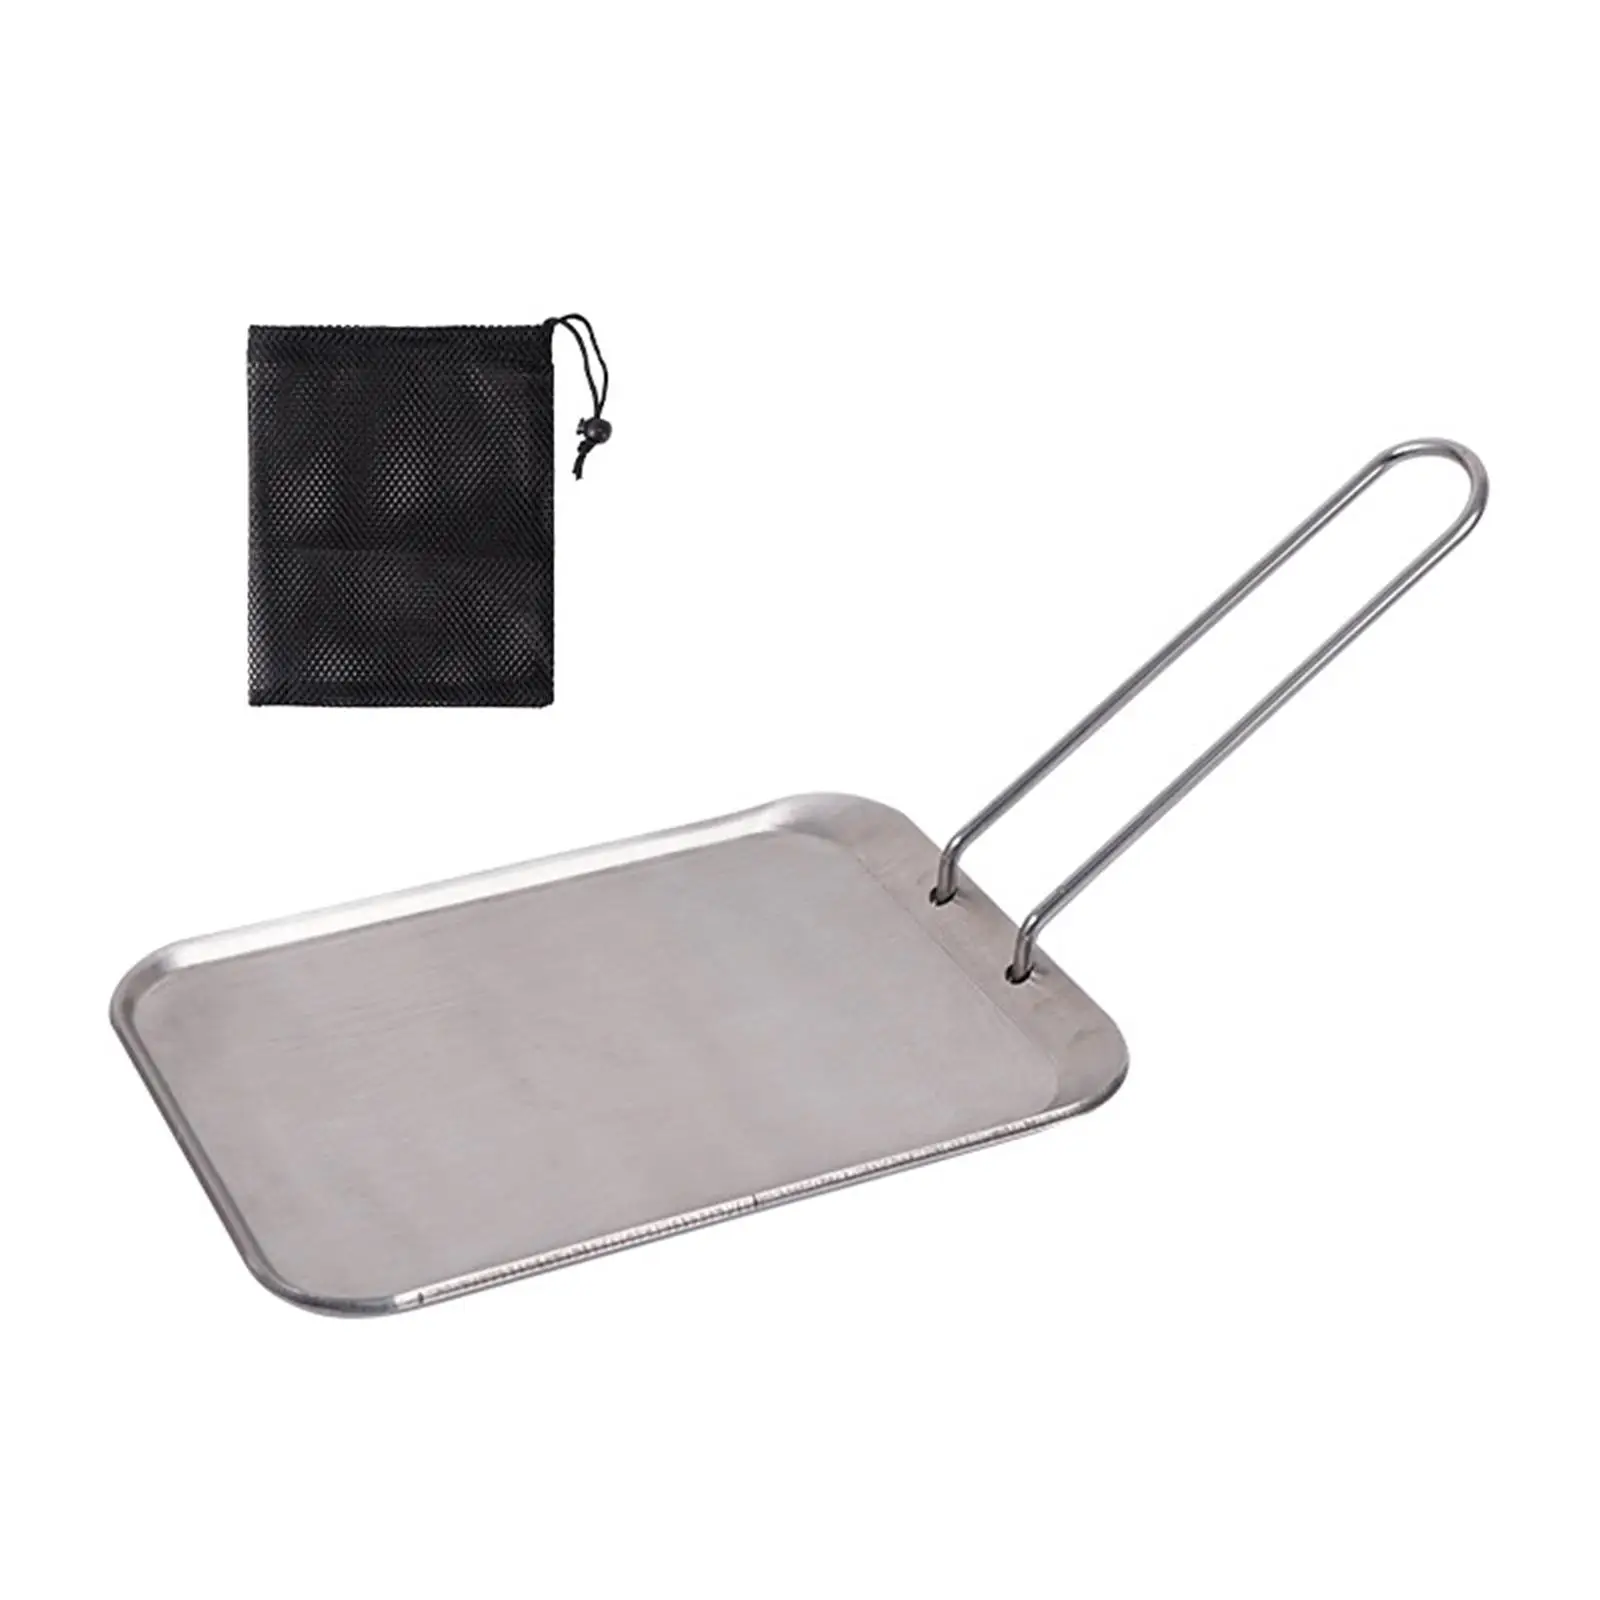 Frying Pan Griddle for Vegetables Meat Steak Kitchen Fish Sauteing Grill Pan